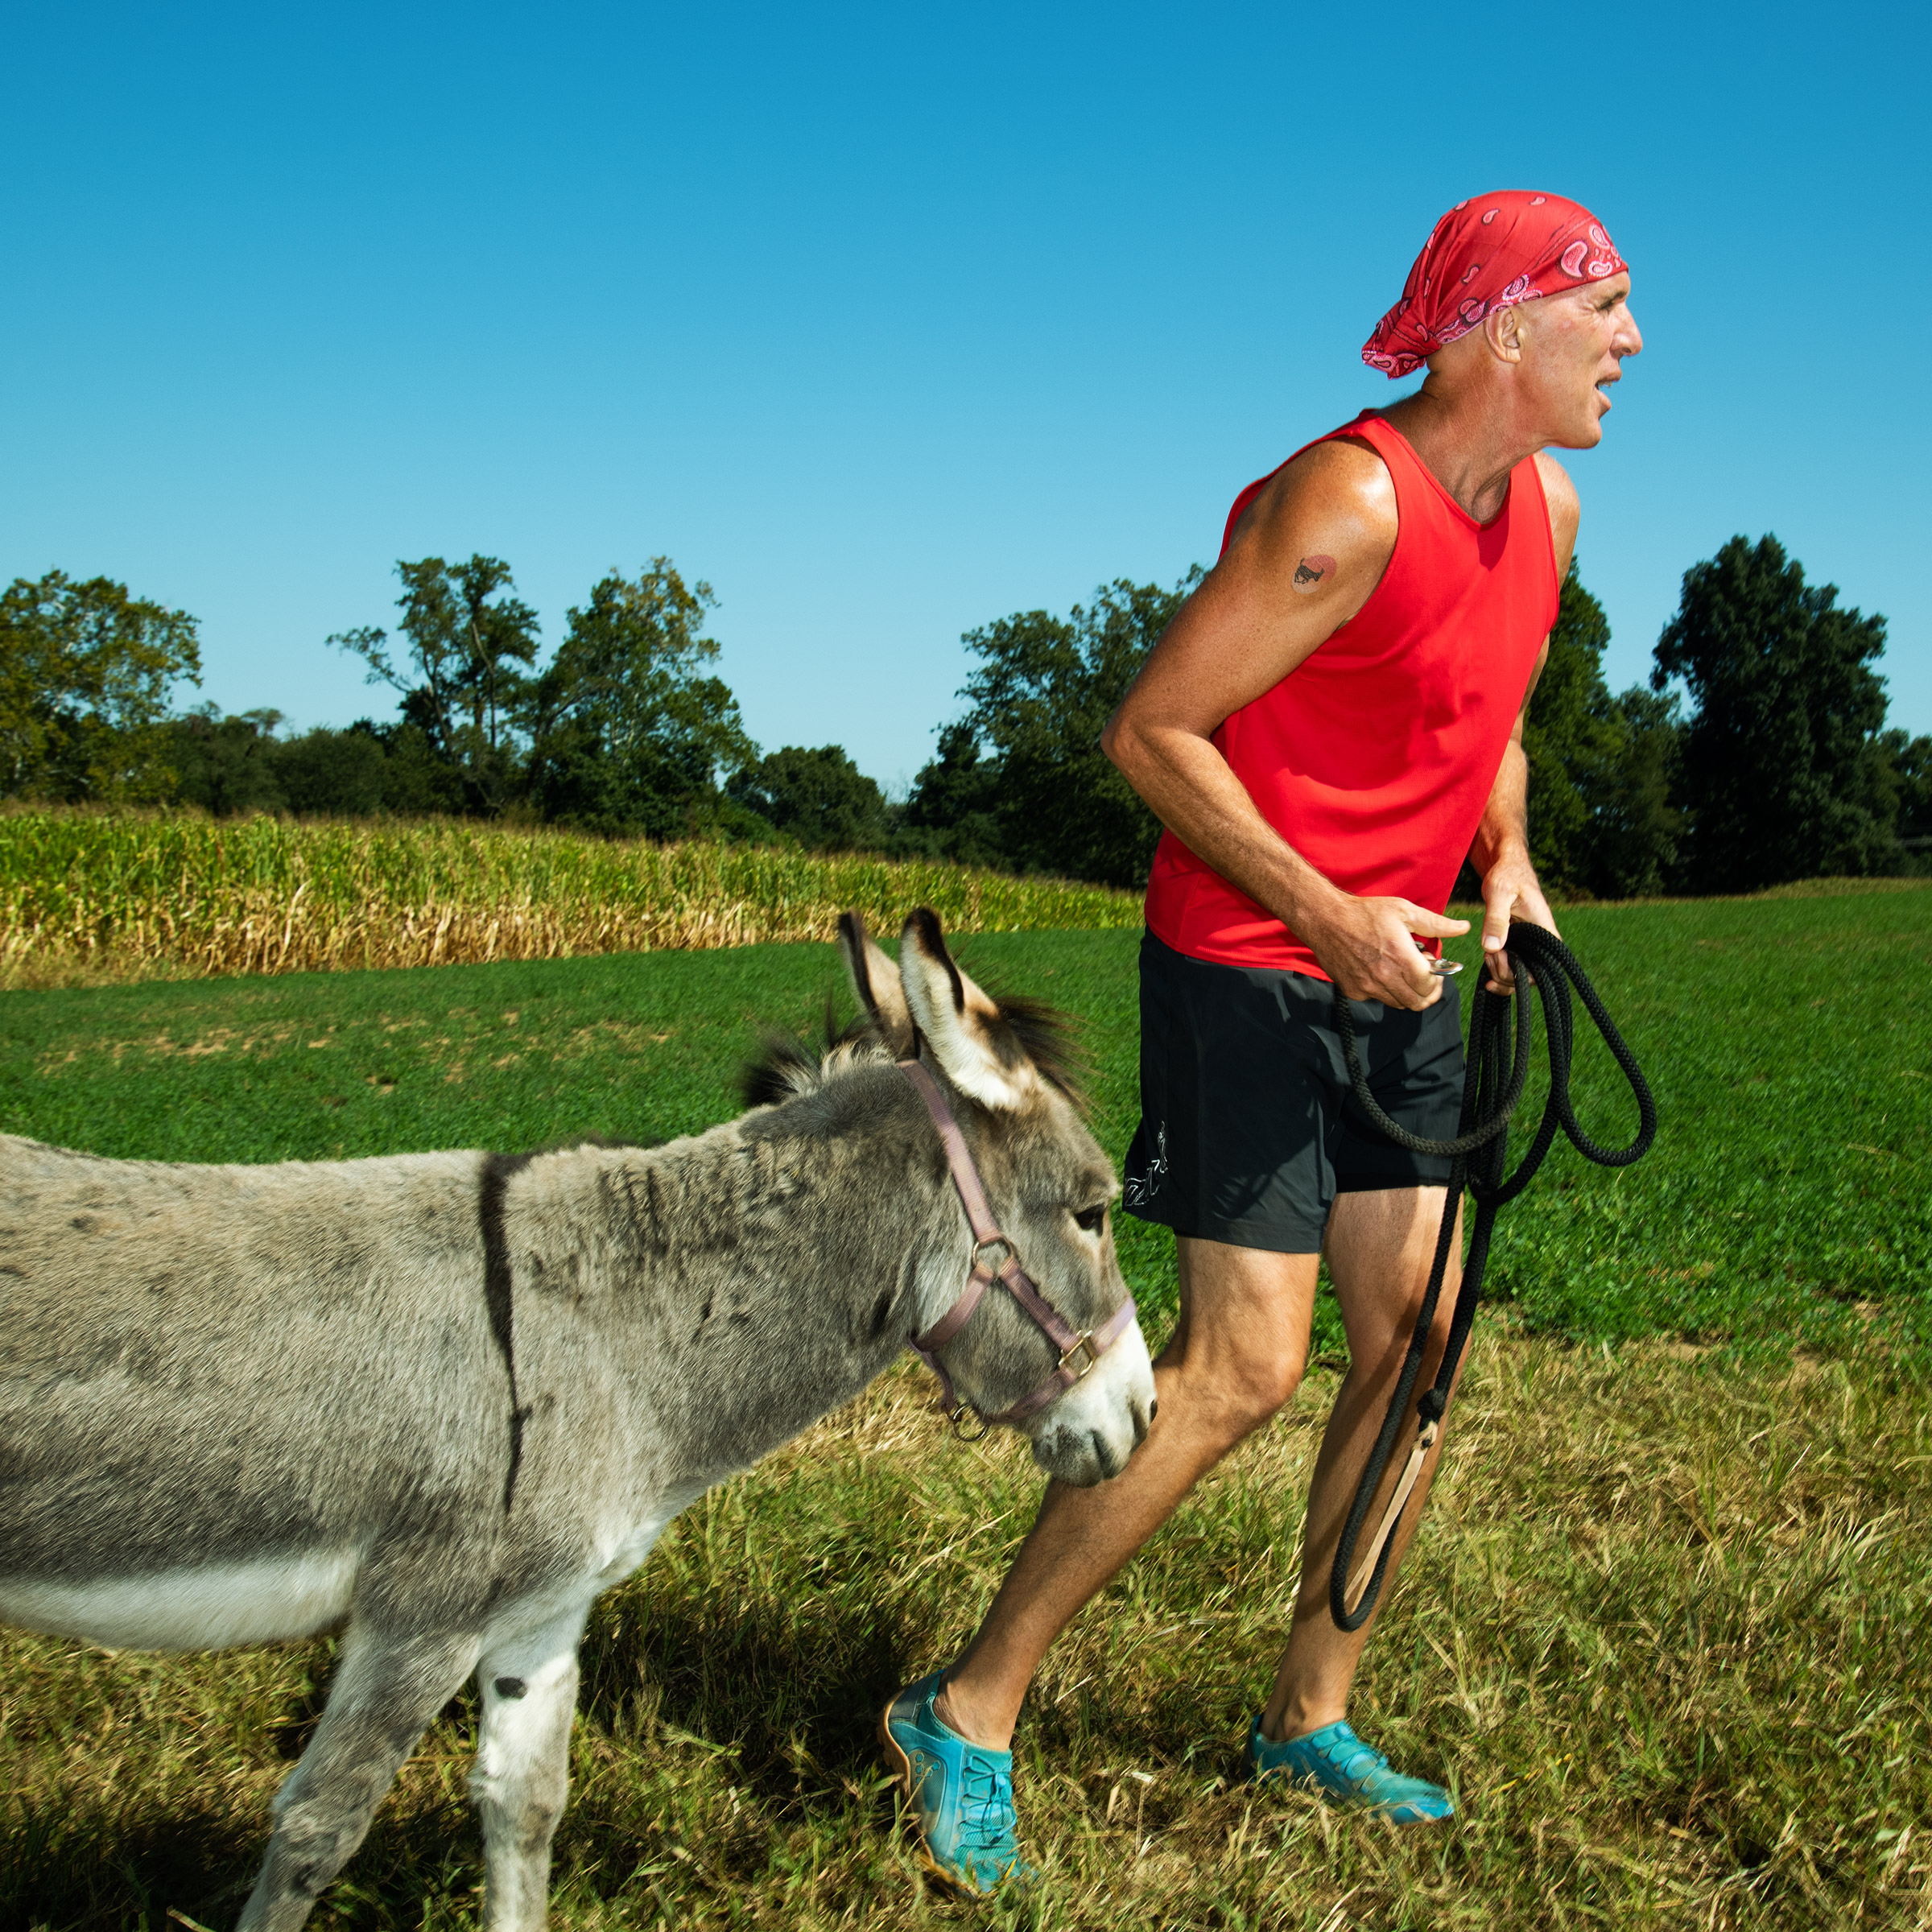 Chris McDougall helped spark of barefoot running craze. Now he races with donkeys.